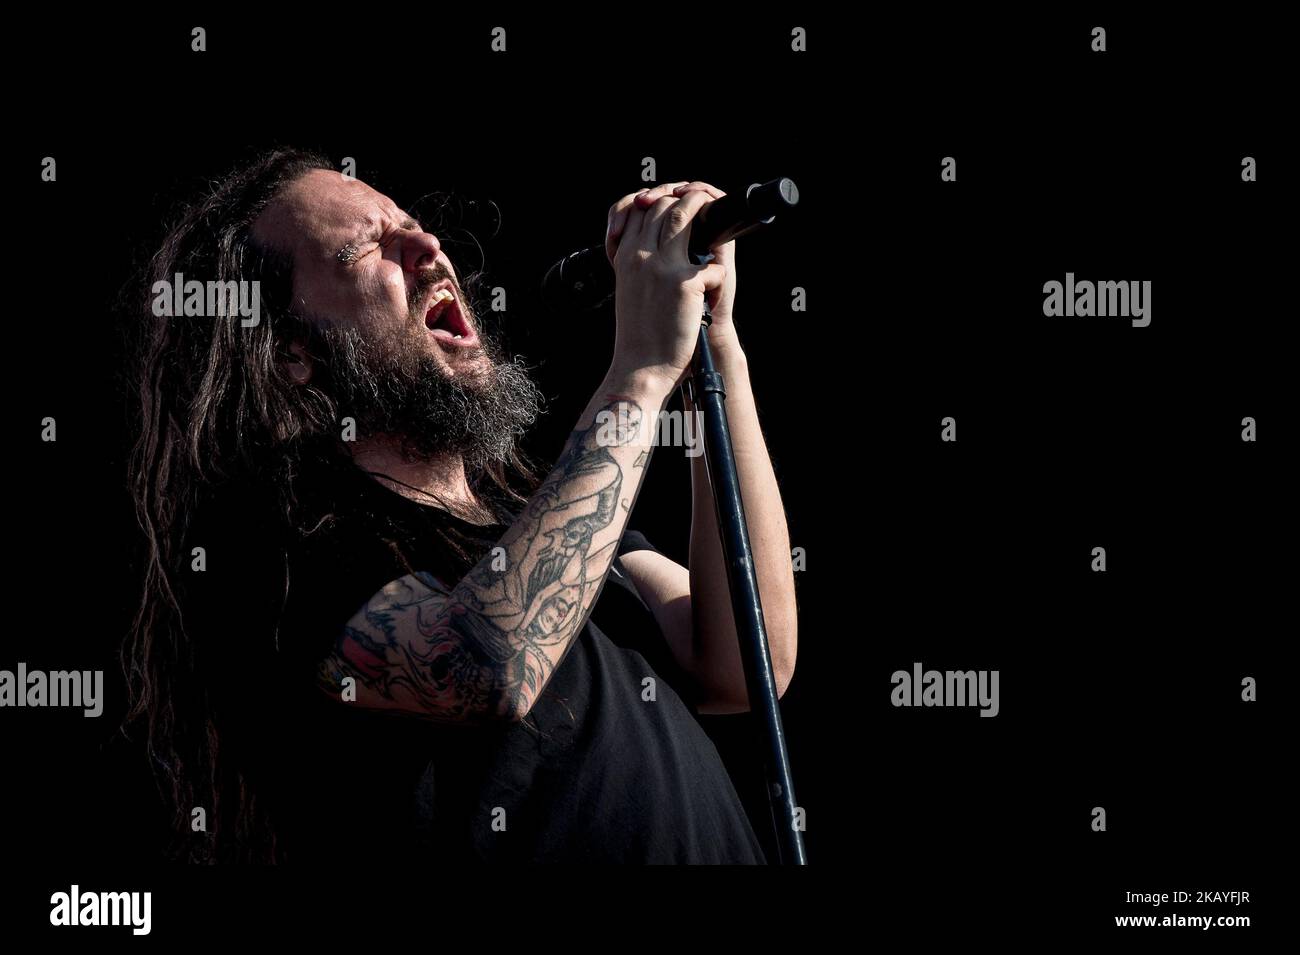 American singer and musician Jonathan Davis best known as the lead vocalist and frontman of Nu Metal band Korn performs live on stage during Firenze Rocks festival at Visarno Arena , Florence, Italy on 16 June 2018. Photo by Giuseppe Maffia (Photo by Giuseppe Maffia/NurPhoto) Stock Photo